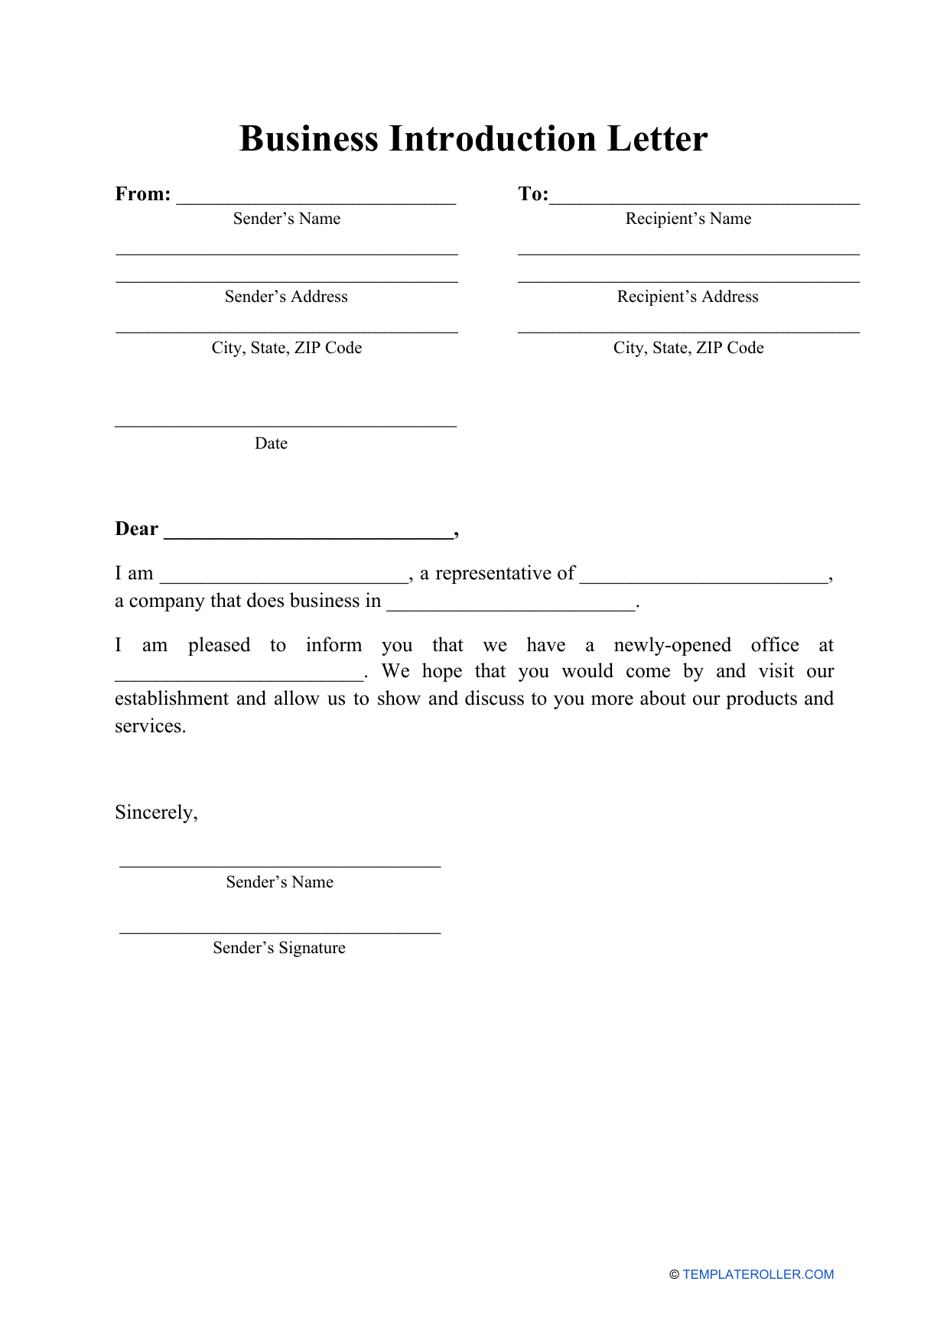 Business Introduction Letter Template, Page 1